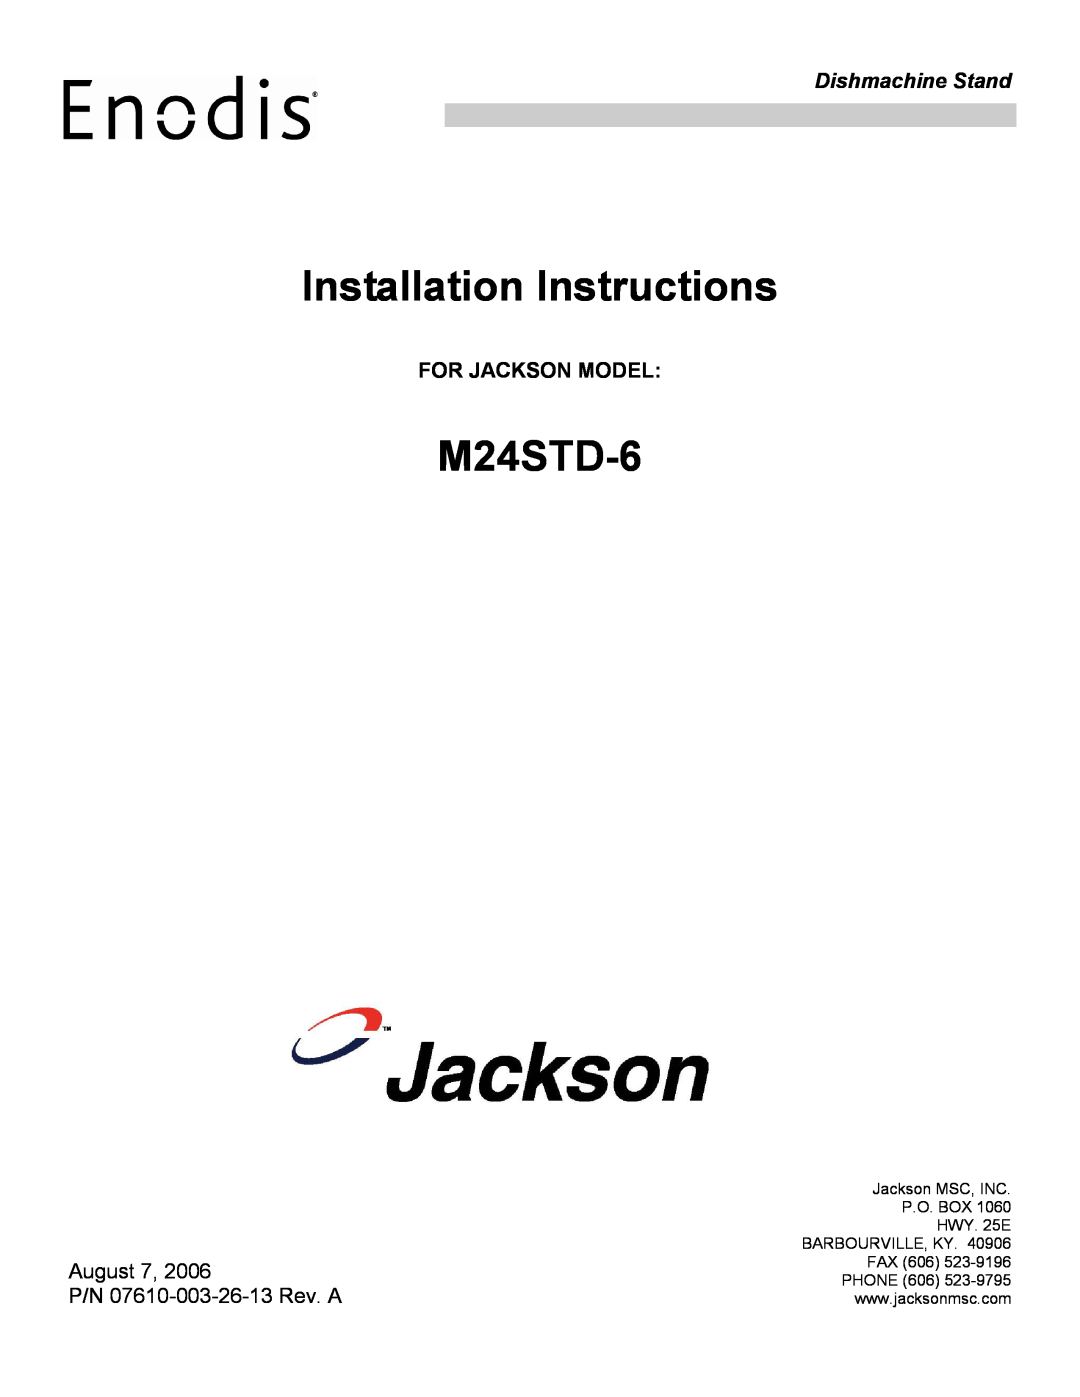 Jackson M24STD-6 installation instructions For Jackson Model, Installation Instructions, Dishmachine Stand 